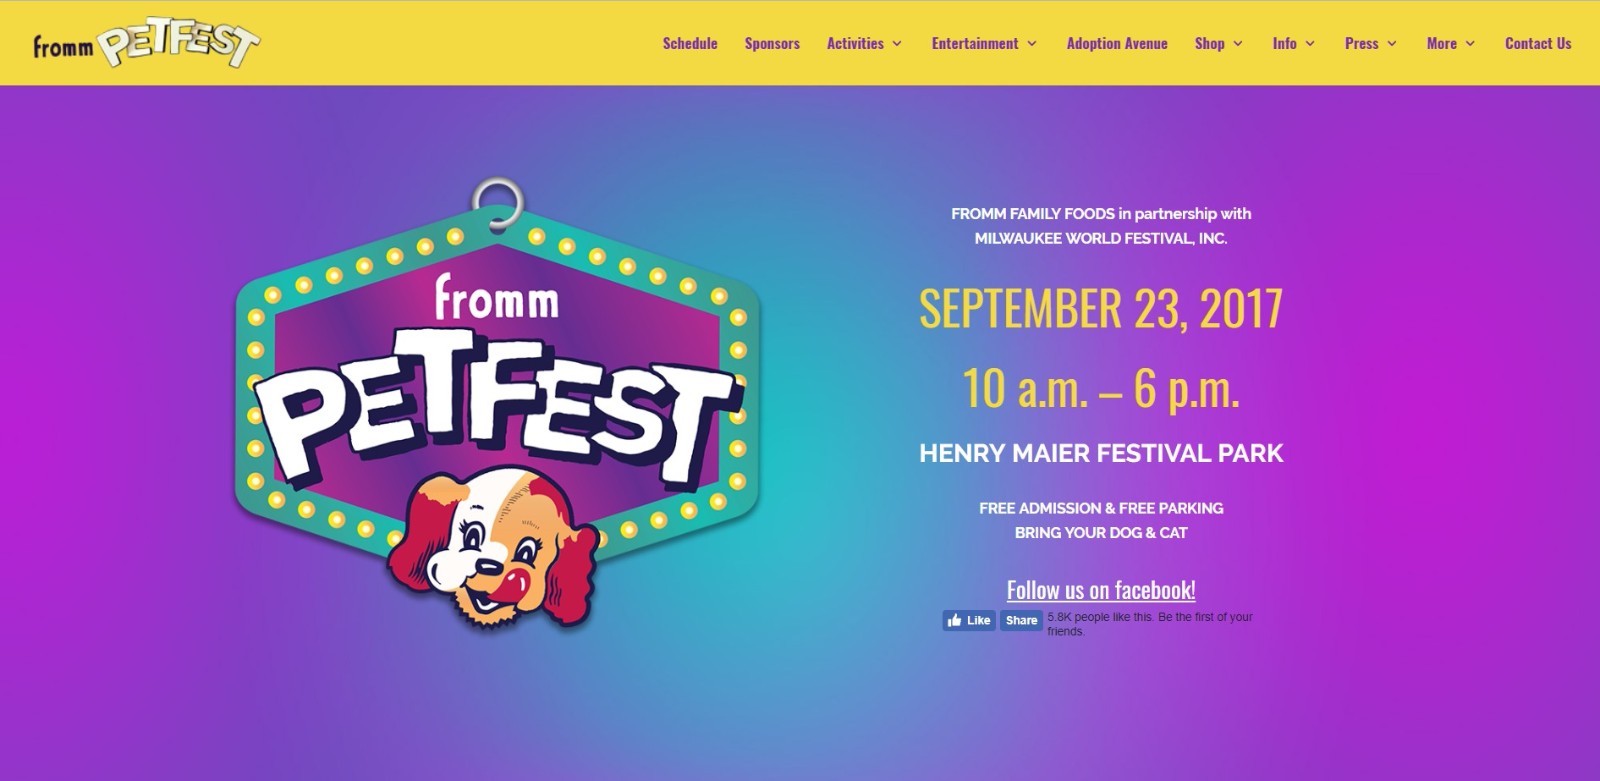 Fromm Petfest